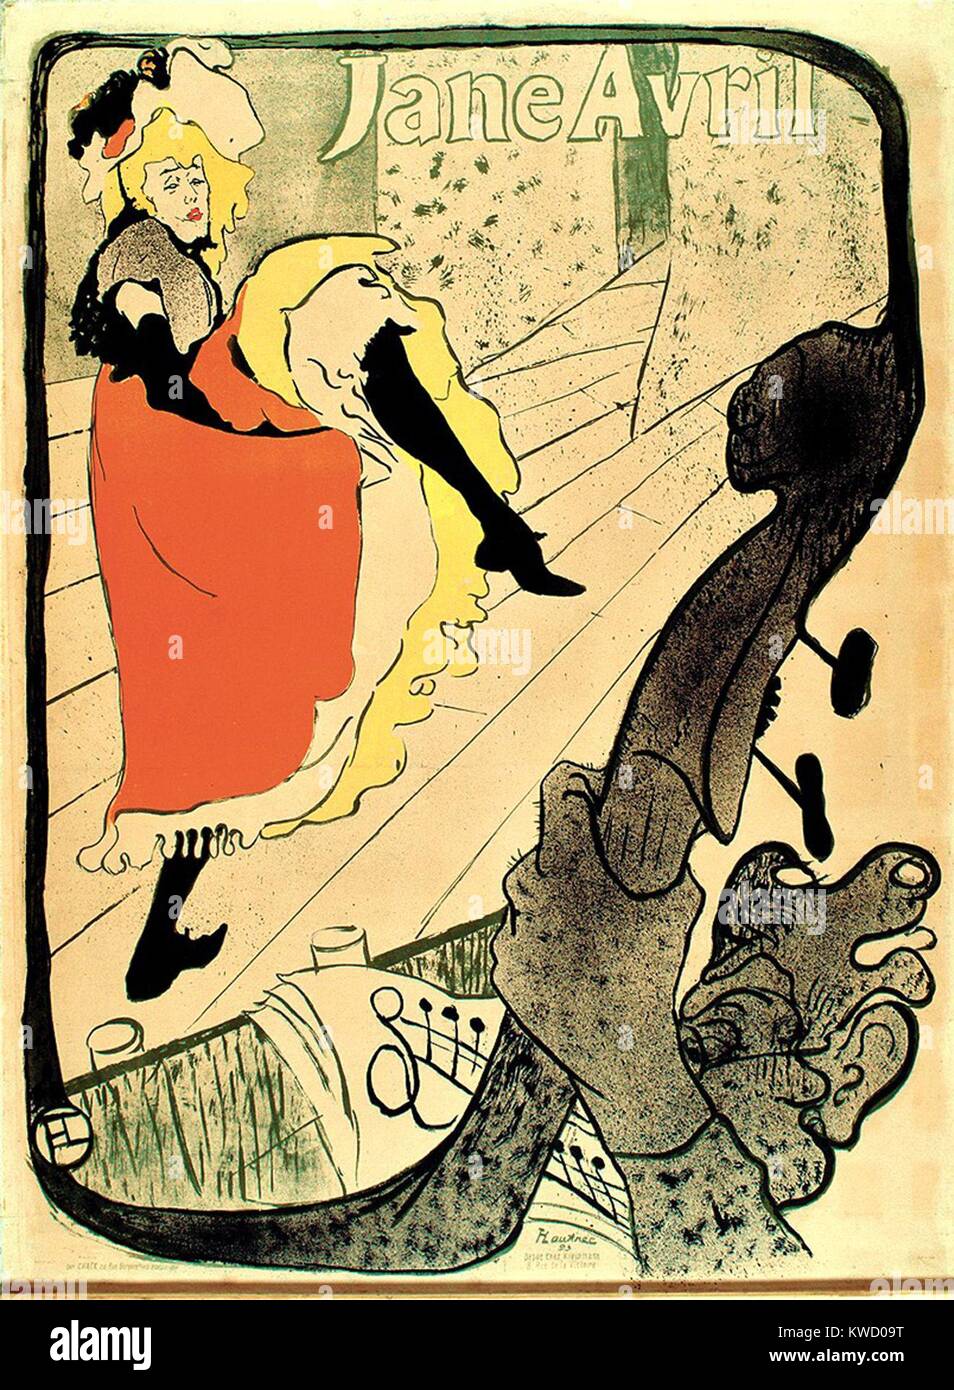 Jane Avril, by Henri de Toulouse-Lautrec, 1893, French Post-Impressionist print, lithograph. Avril, friend of the artist, commissioned this print to advertise her cabaret show at the Jardin de Paris (BSLOC 2017 5 65) Stock Photo